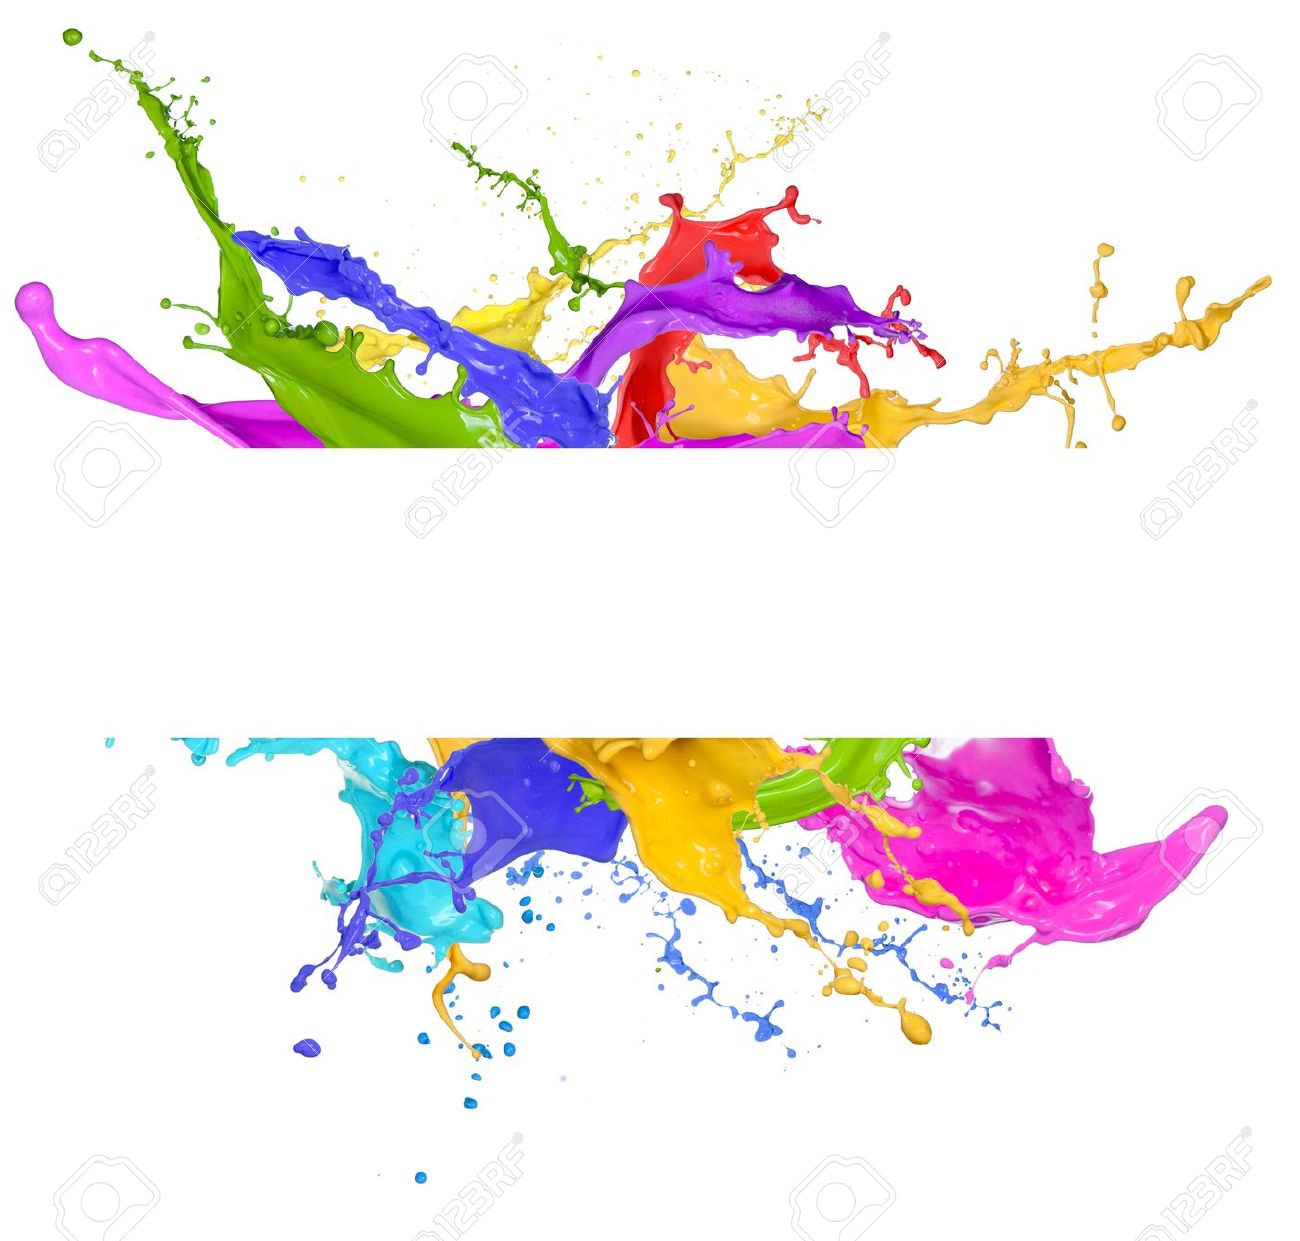 Colored Splashes In Abstract Shape Isolated On White Background 1300x1241